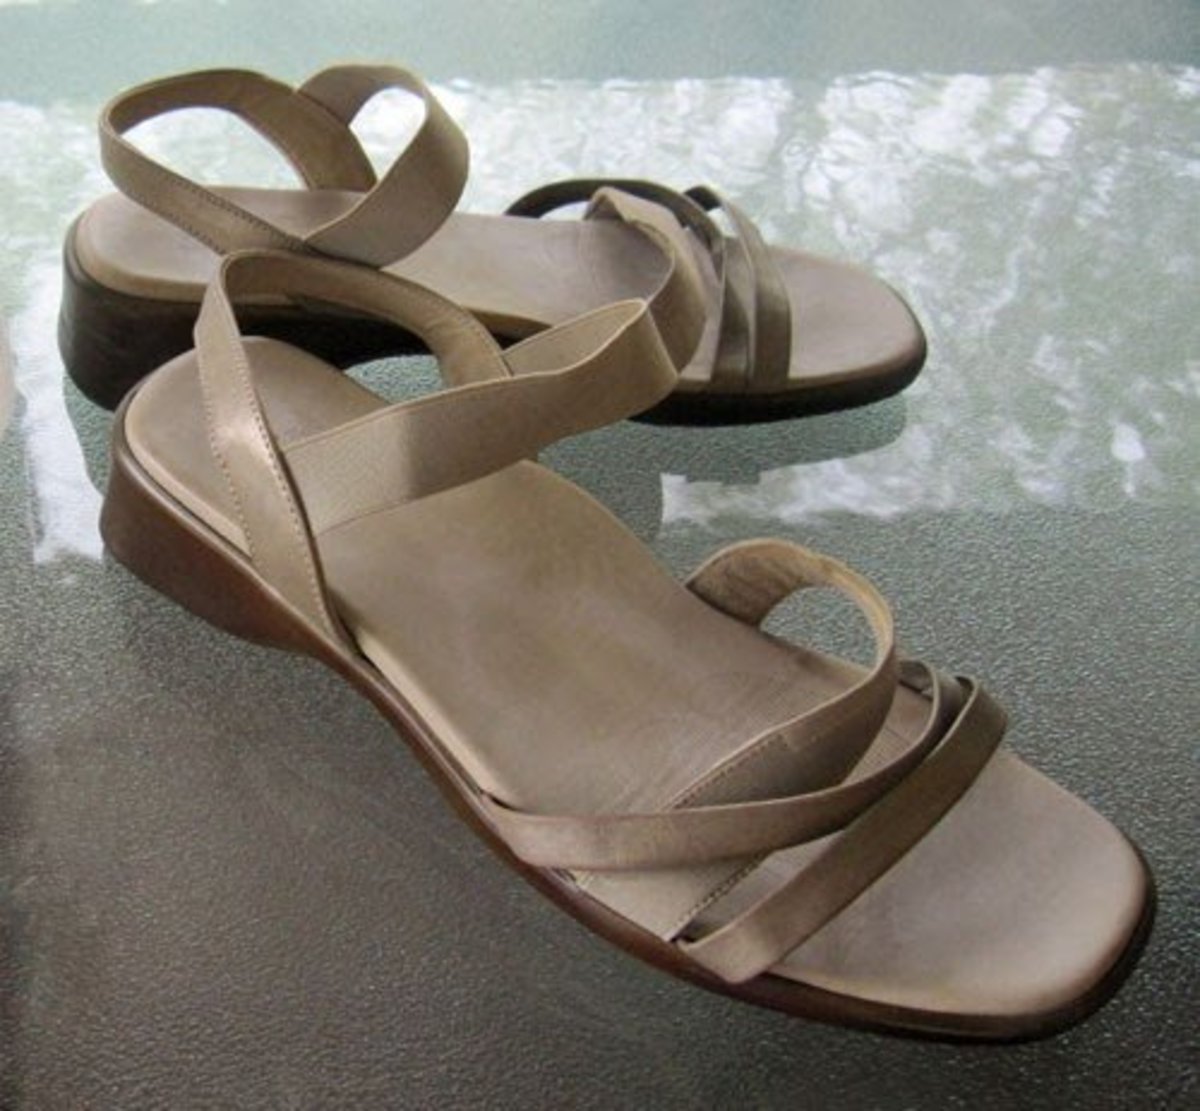 Before: The unpainted sandal